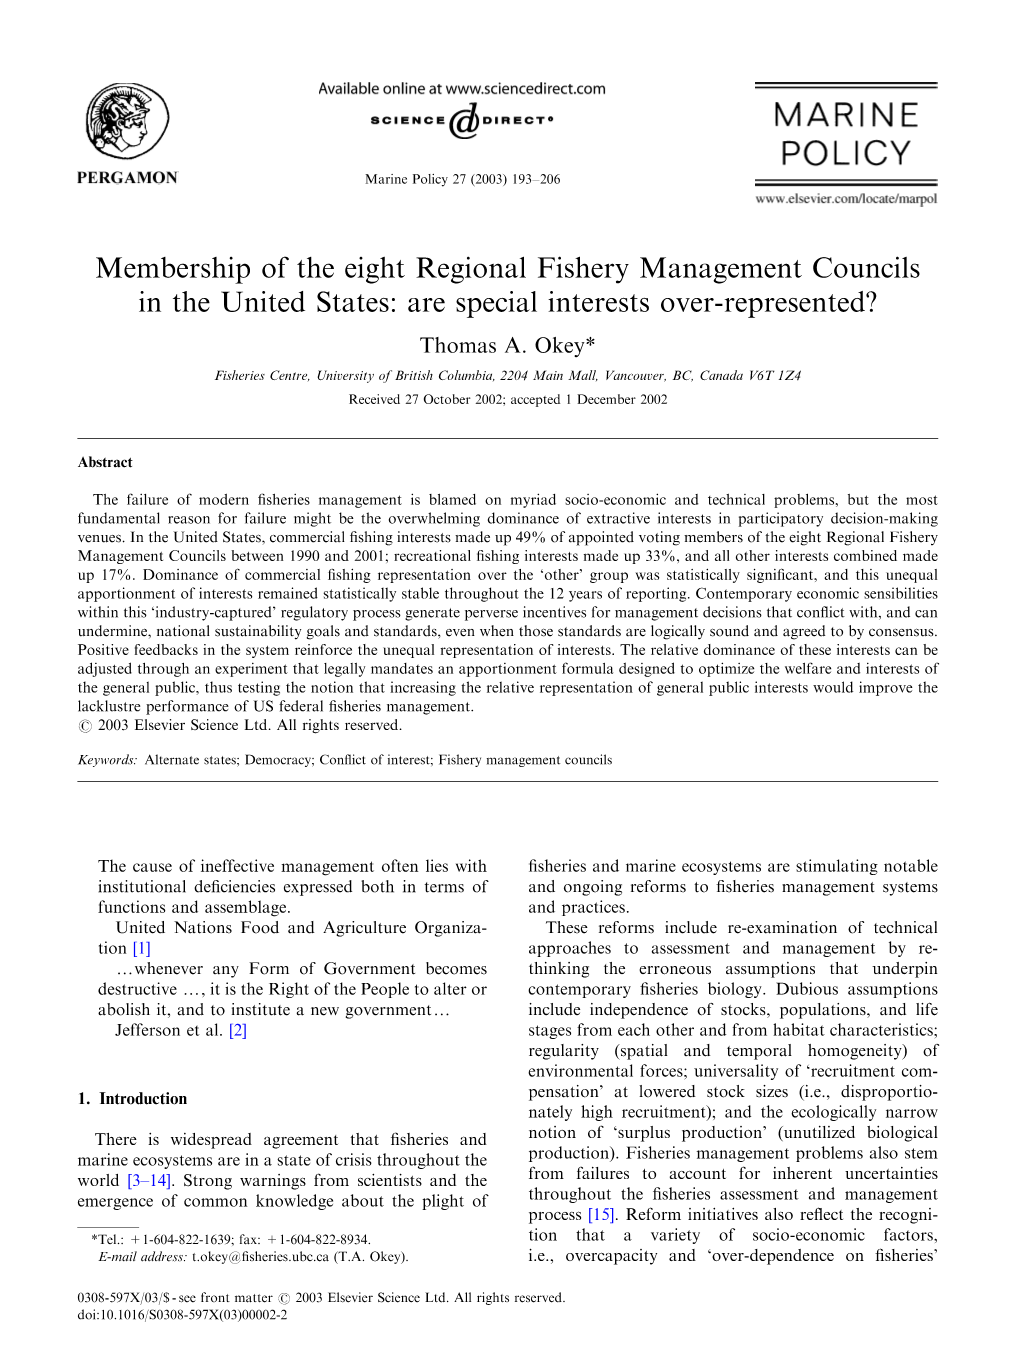 Membership of the Eight Regional Fishery Management Councils in the United States: Are Special Interests Over-Represented? Thomas A